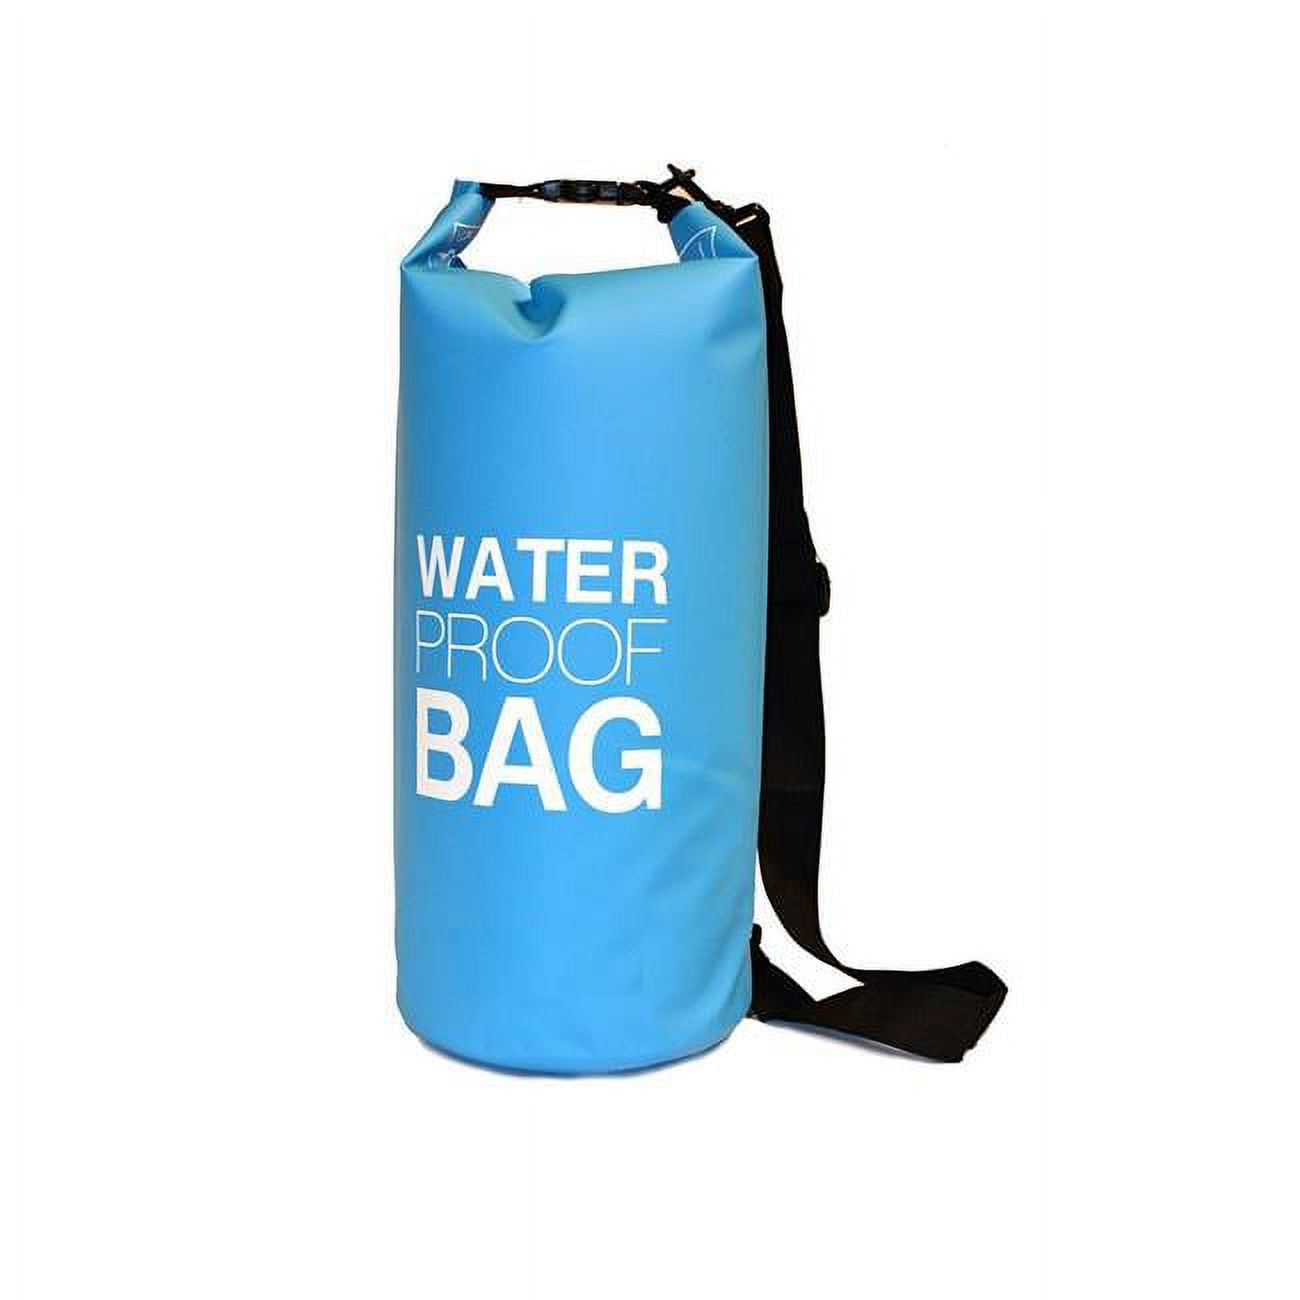 NuPouch 2493 20 Liter Water Proof Bag Light Blue - image 1 of 1